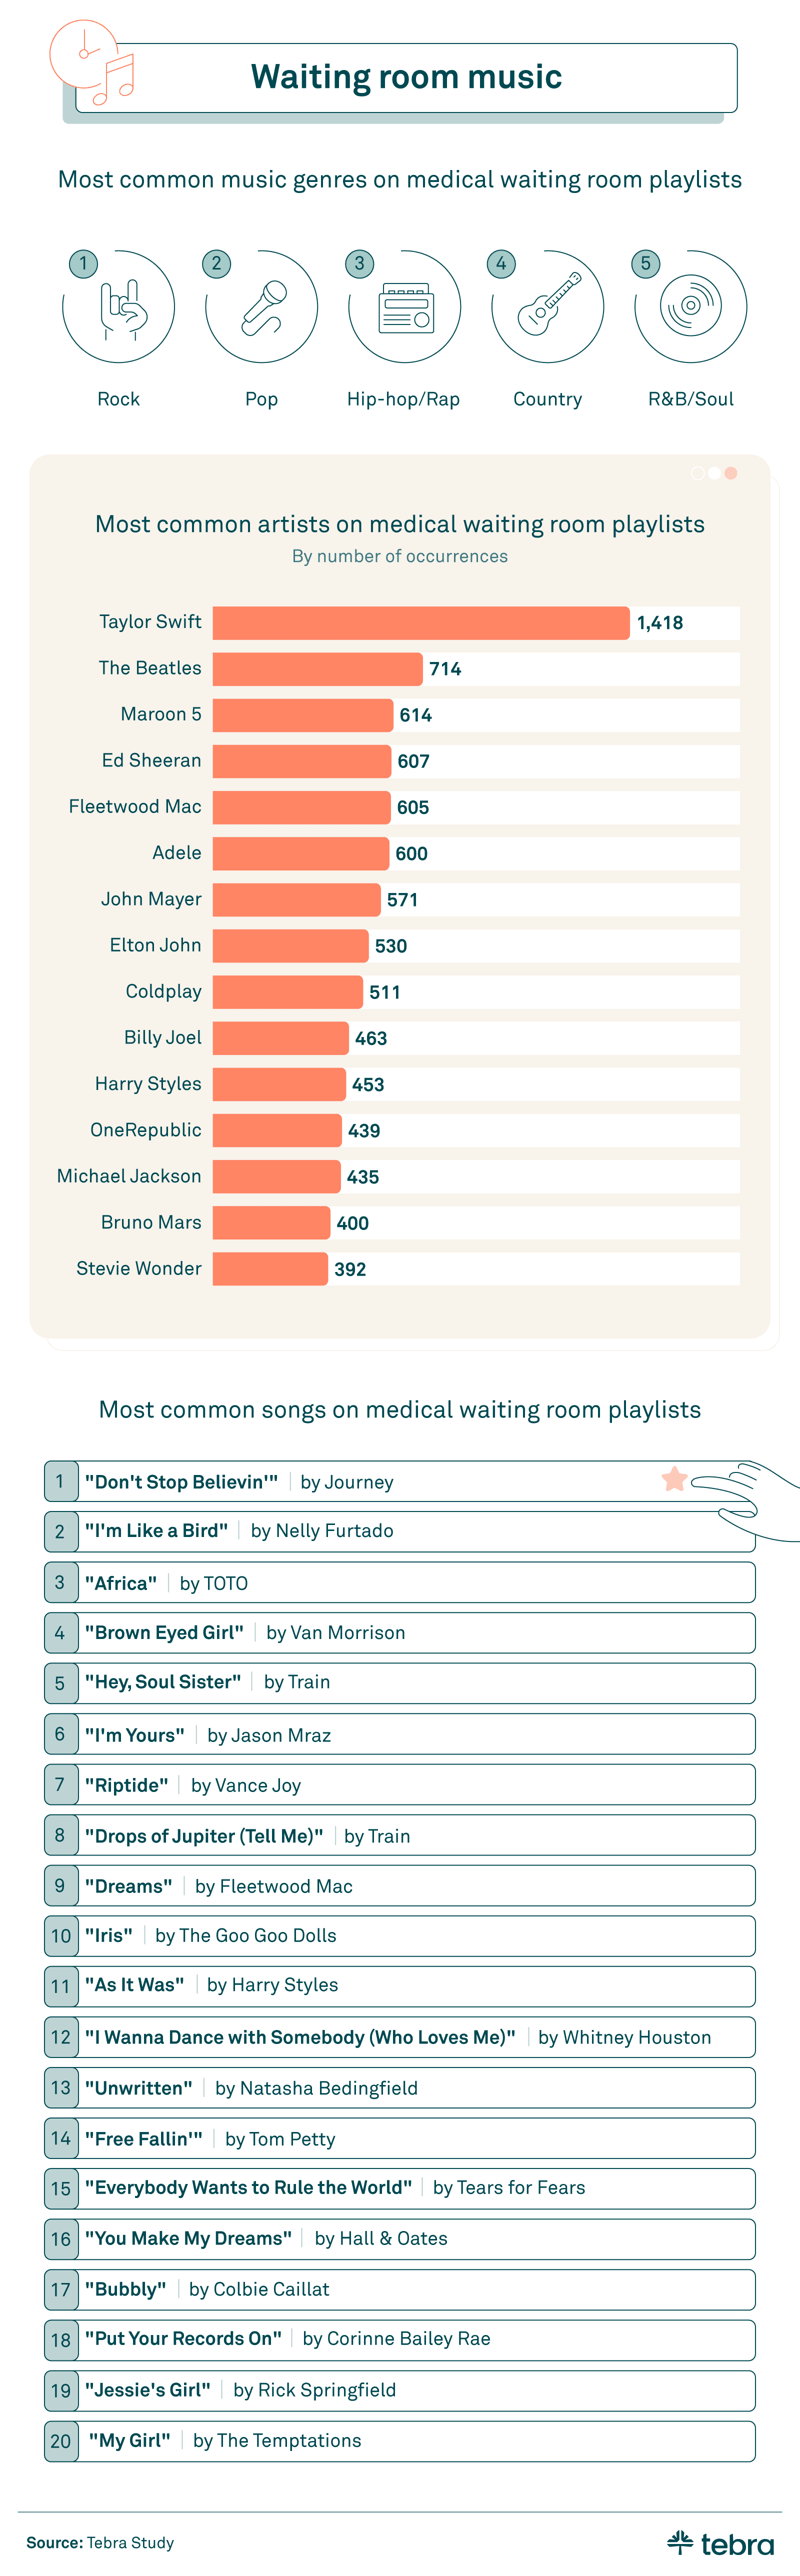 waiting room music survey results - common artists